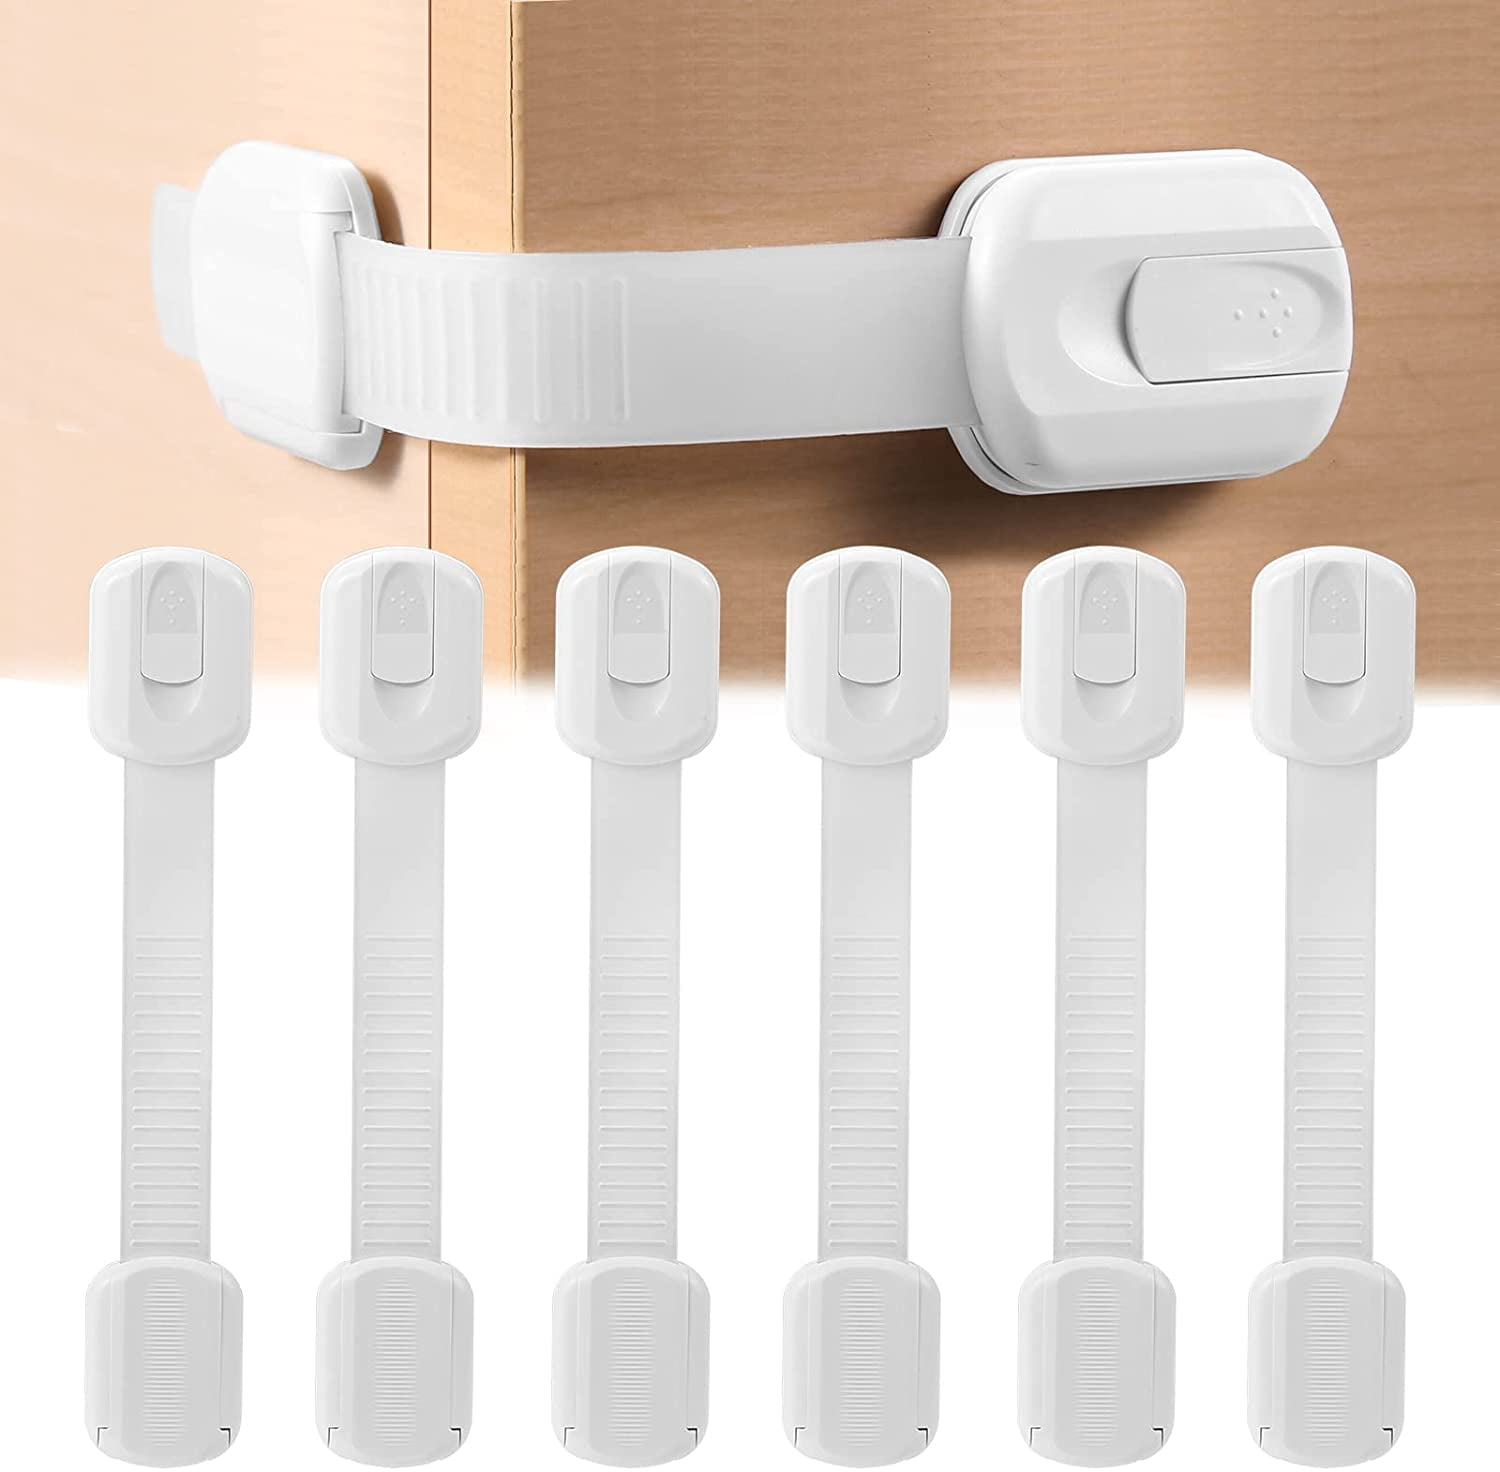 Heldig 6 Pack Cabinet Locks for Babies Safety Kit, Child Proof Cabinets Locks, Baby Proofing Latches for Cabinets and Drawers, Door,Toilet, Fridge & More.